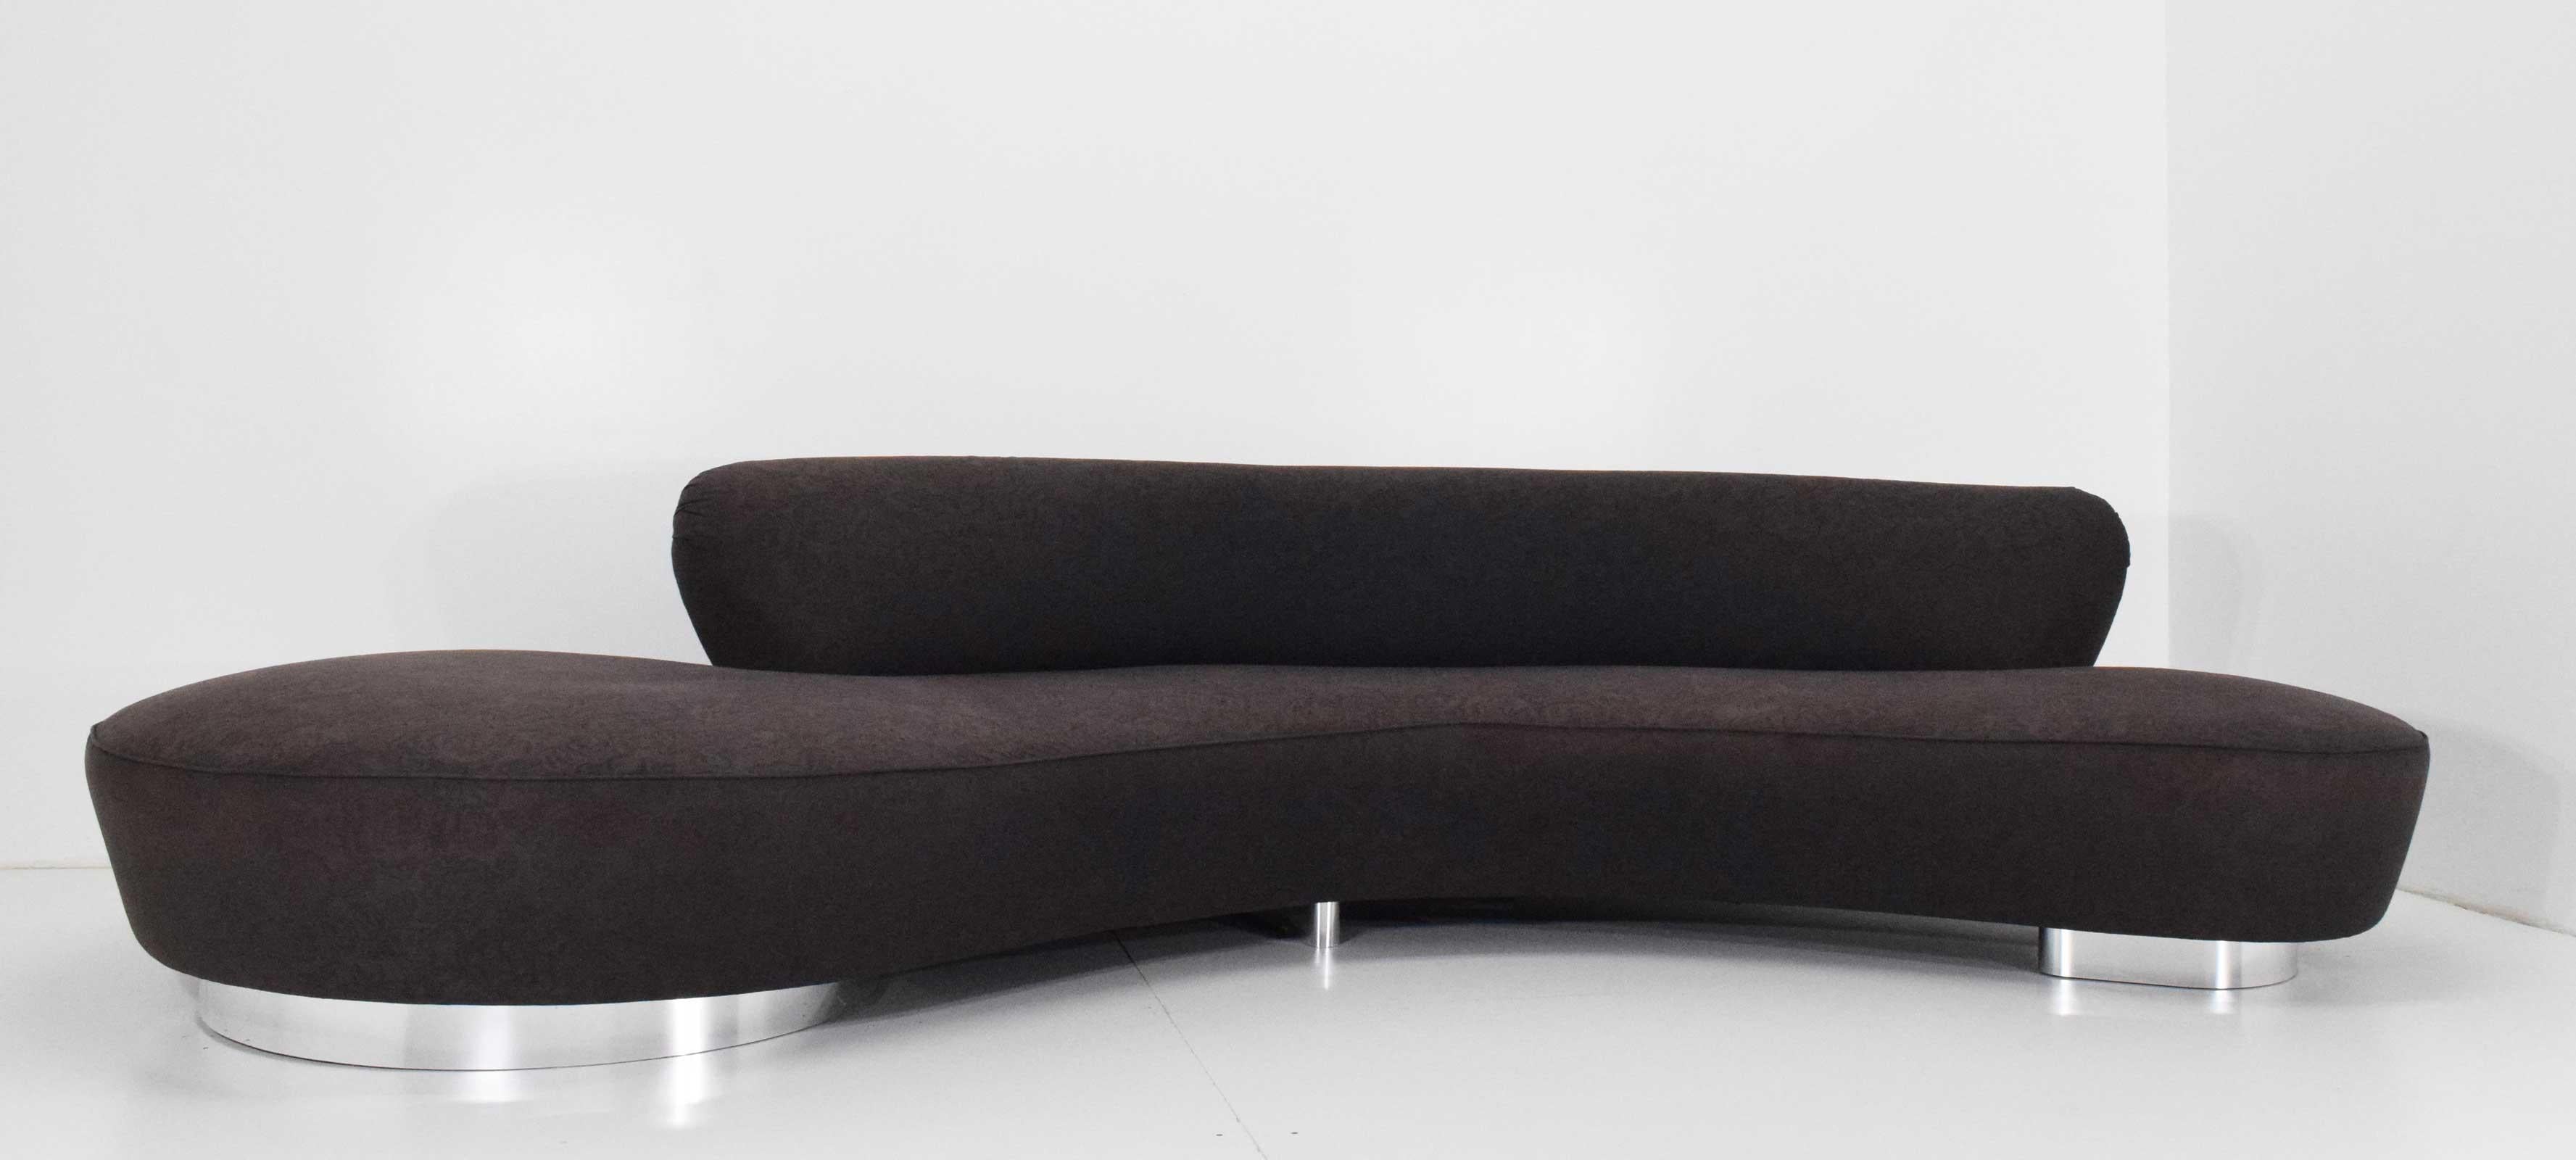 Extra long serpentine sofa by Vladimir Kagan. Chrome bases, ink blue upholstery that can be removed for cleaning as attached via velcro. Sofa can also be reupholstered in fabric of choice. The sofa was designed by Vladimir Kagan in 1950 and has been